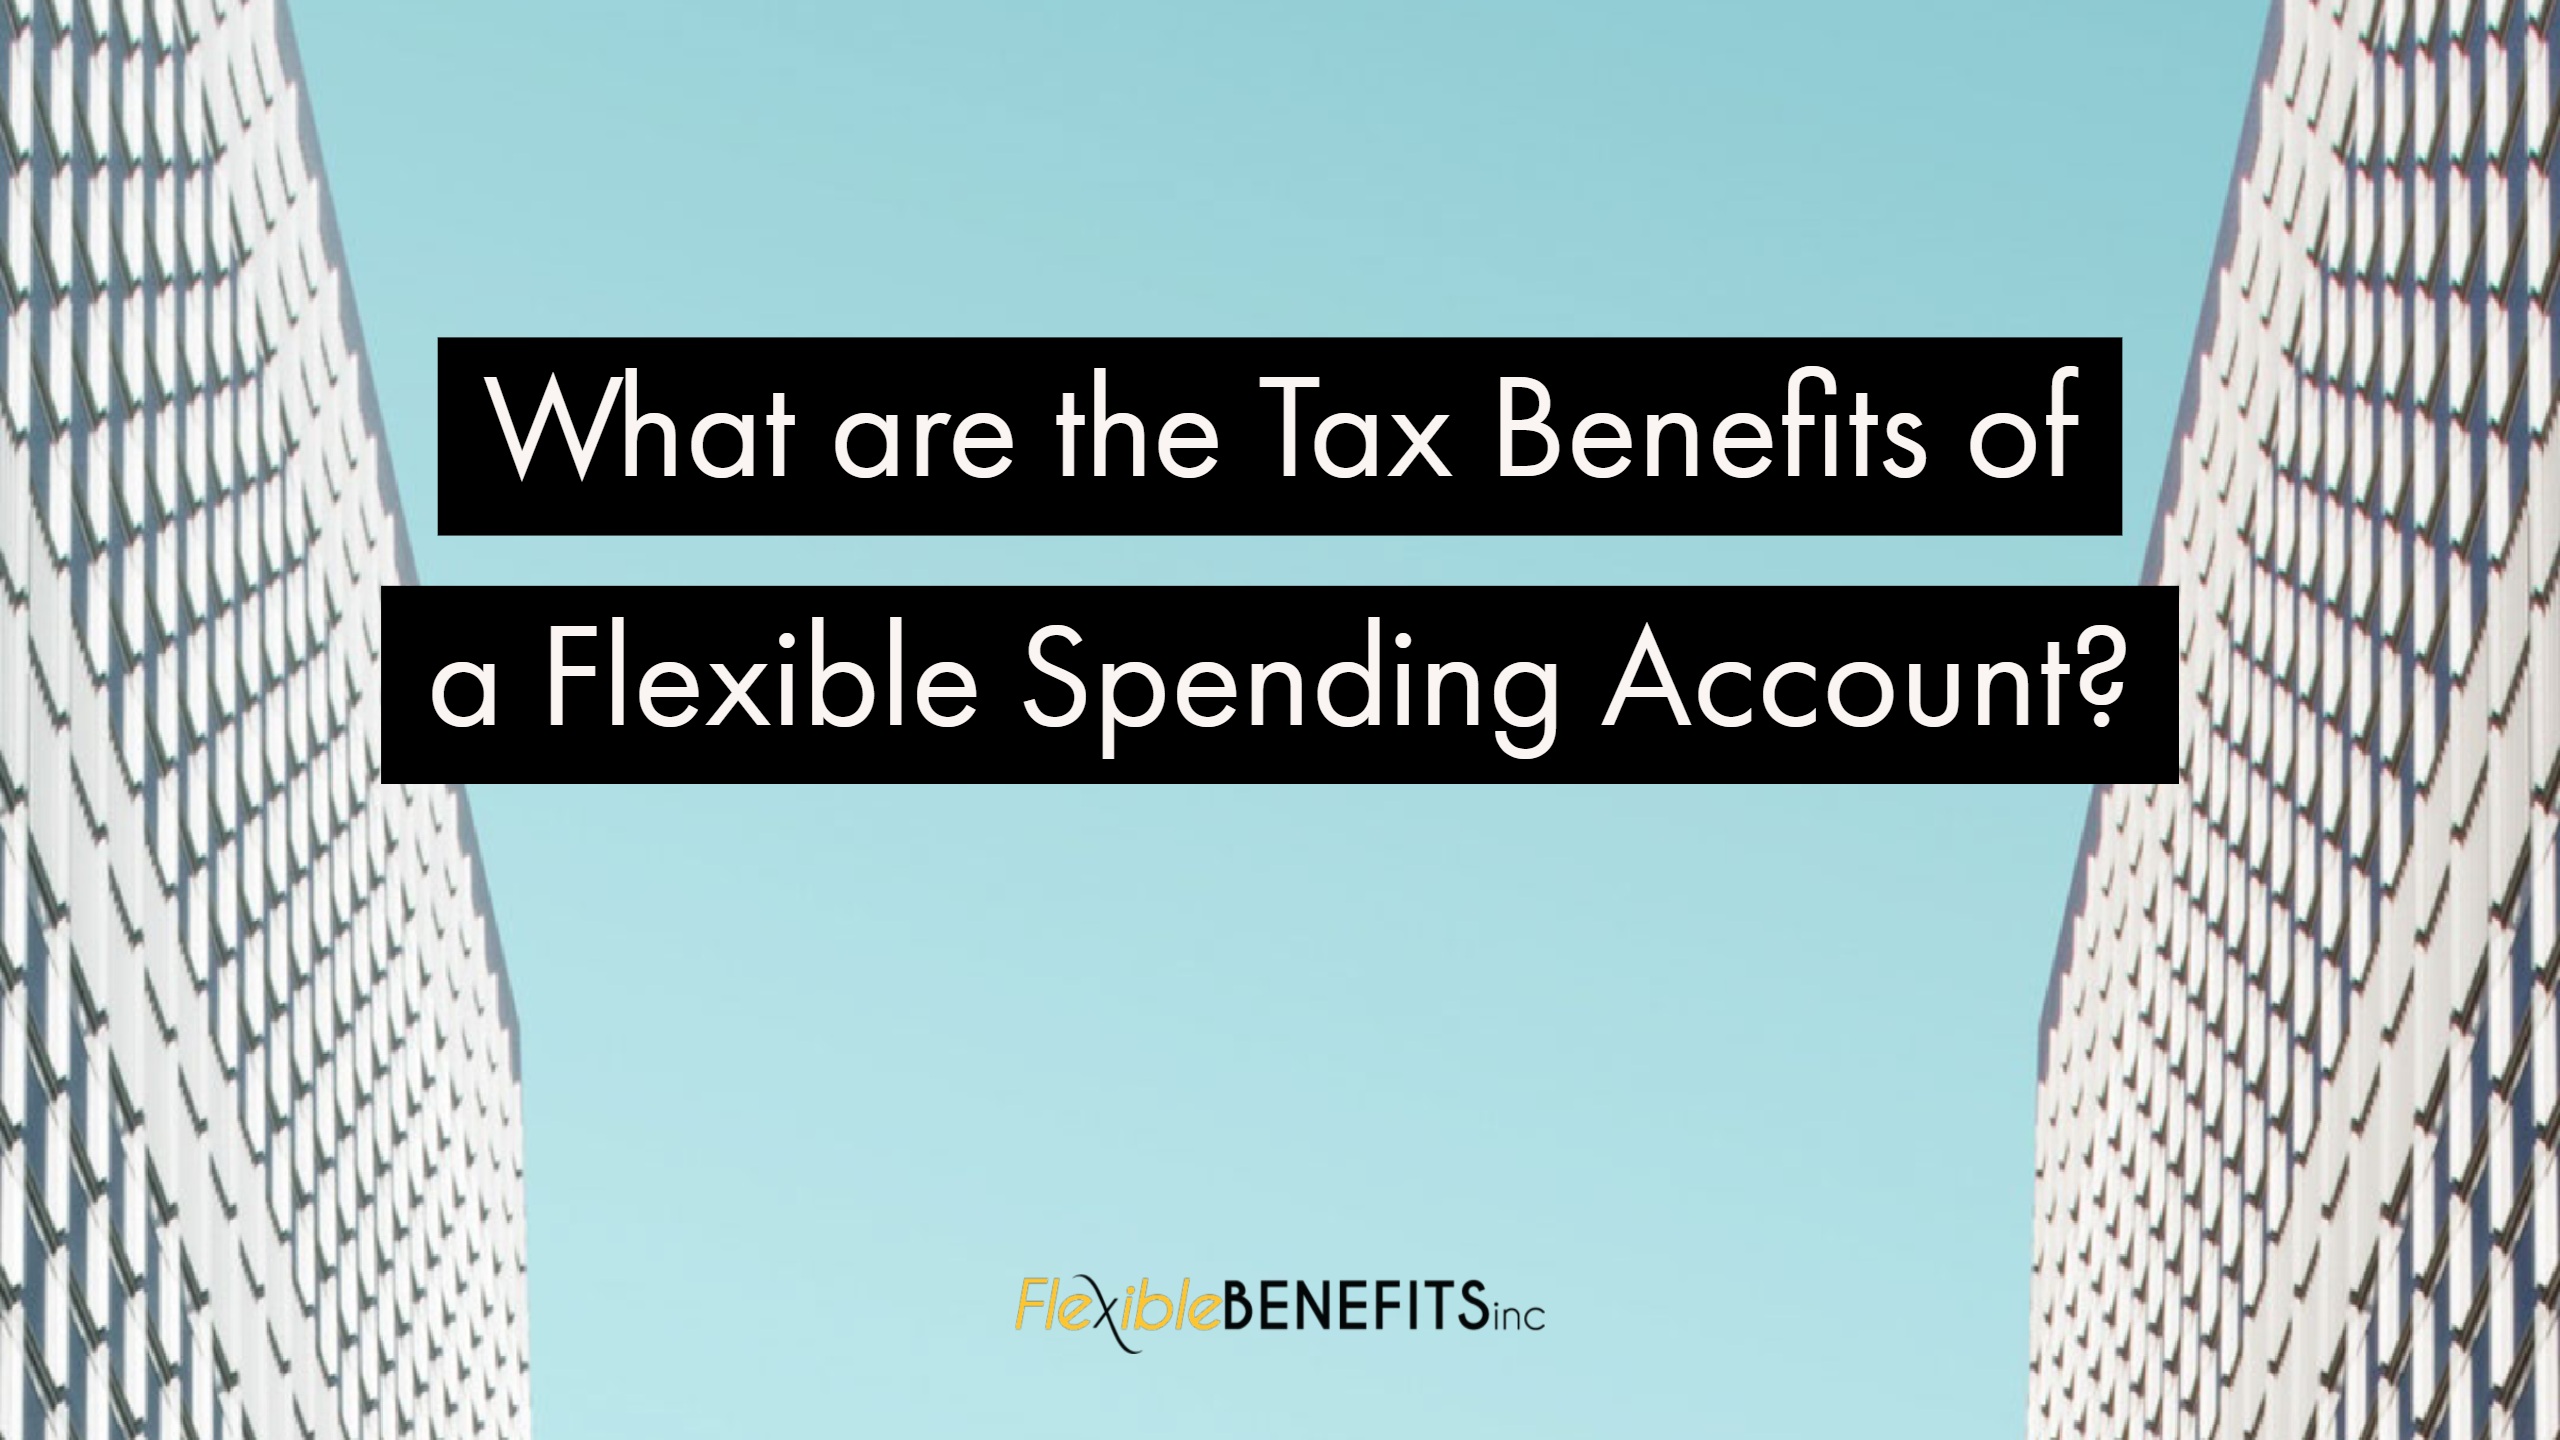 What are the Tax Benefits of a Flexible Spending Account? Flexible